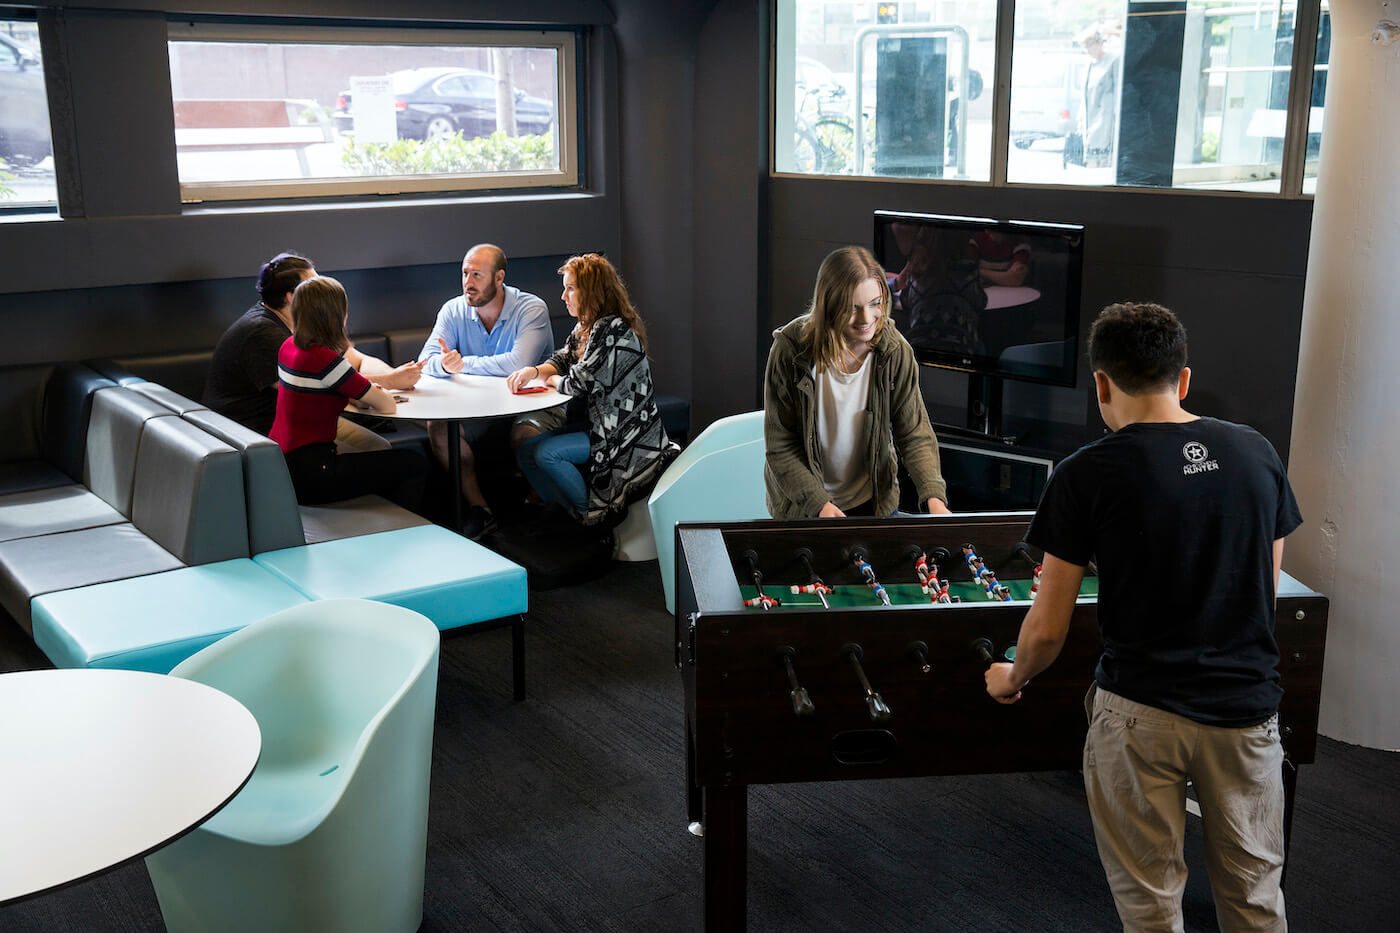 People playing foosball in foreground. Four people sitting at a table behind.